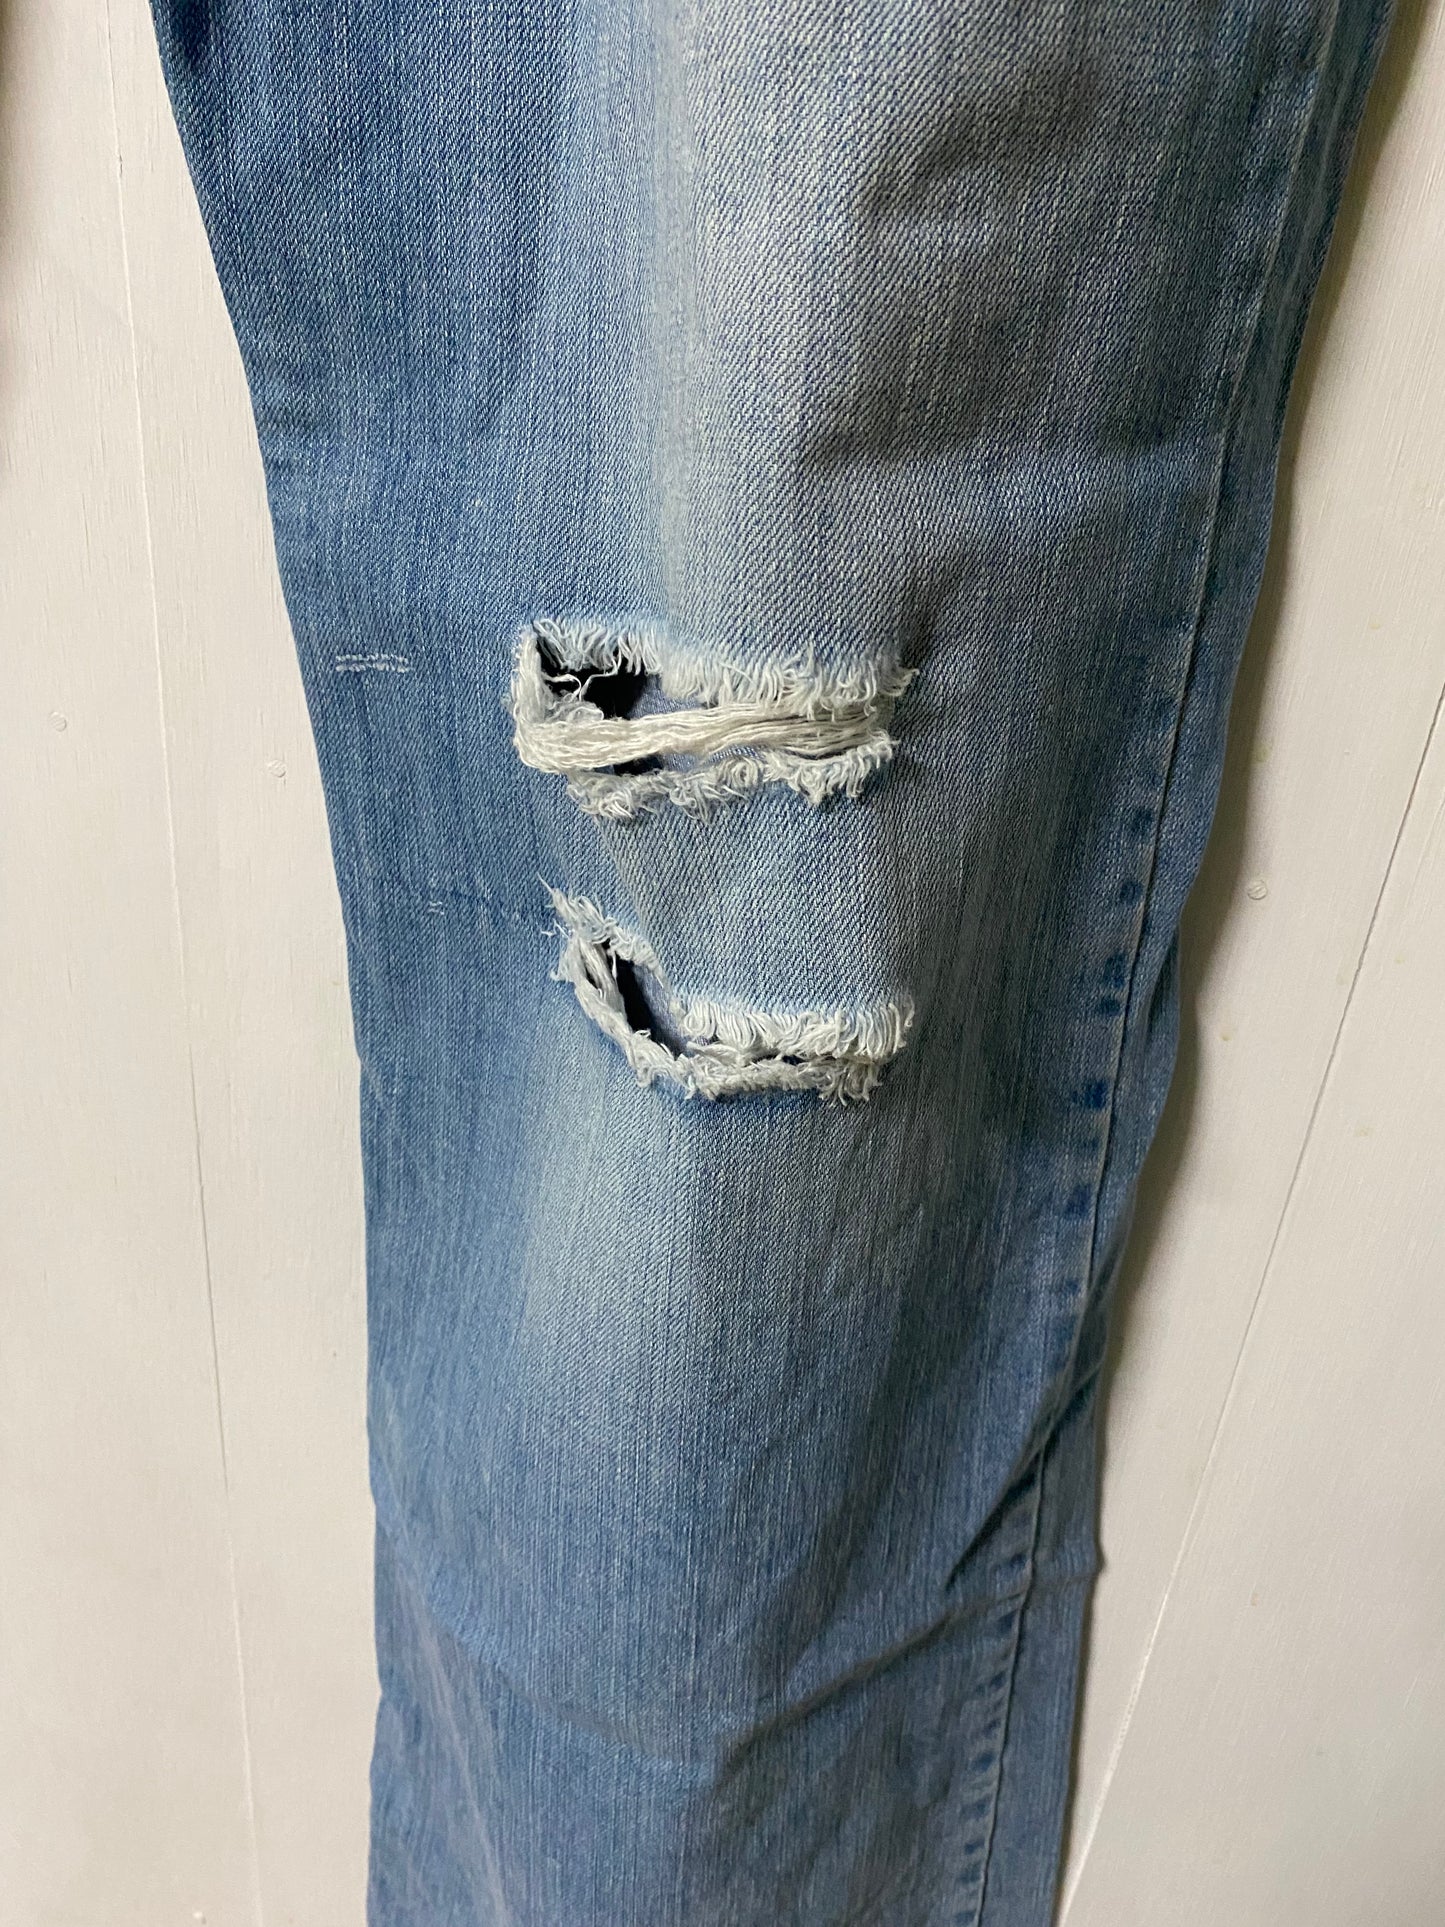 00's Lucky Brand Houston Loose-fit Denim